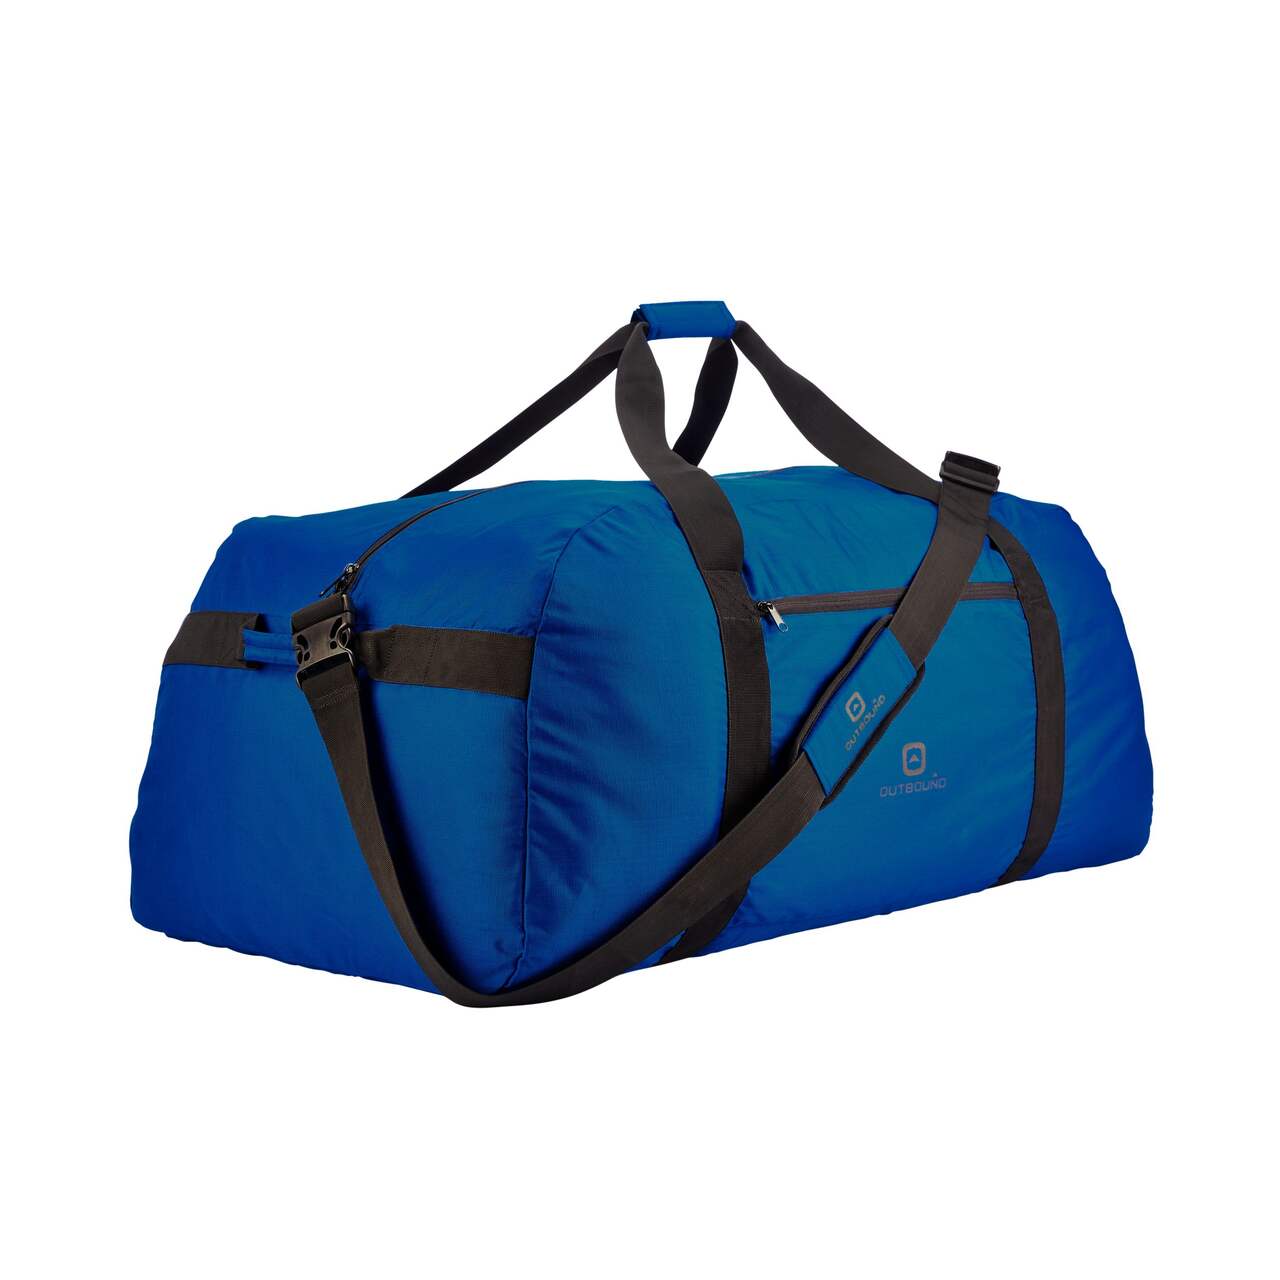 https://media-www.canadiantire.ca/product/playing/camping/backpacks-luggage-accessories/0766200/outbound-extra-large-180l-duffle-9e82c3ac-4e2b-40db-85c9-97e8c424329e-jpgrendition.jpg?imdensity=1&imwidth=640&impolicy=mZoom